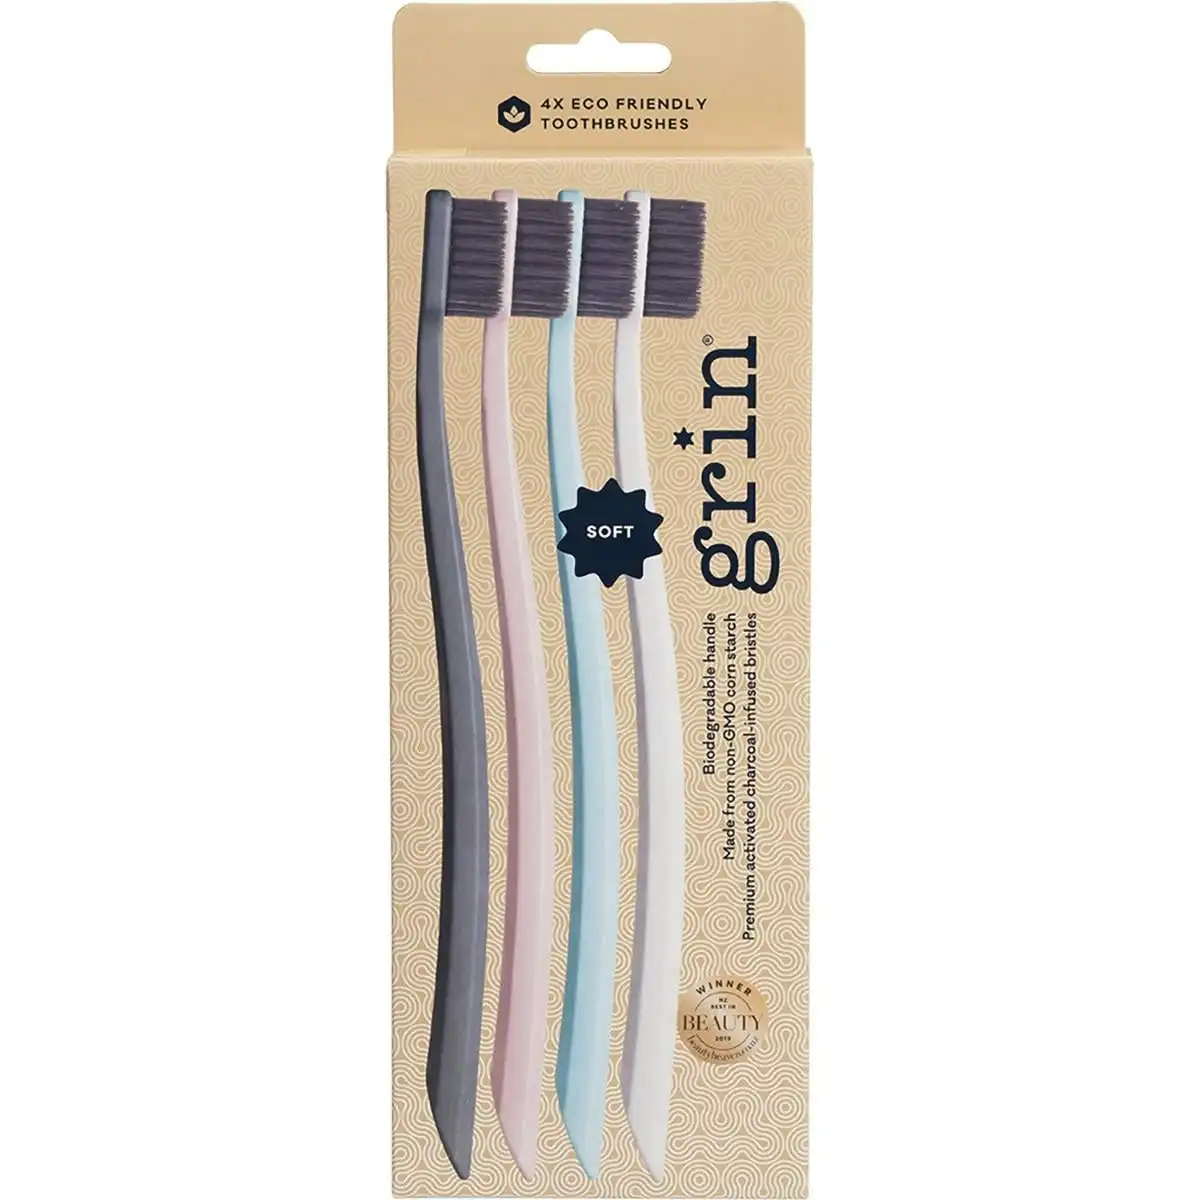 Grin Biodegradable Toothbrush (4-Pack) Soft - Mint, Ivory, Navy & Pink